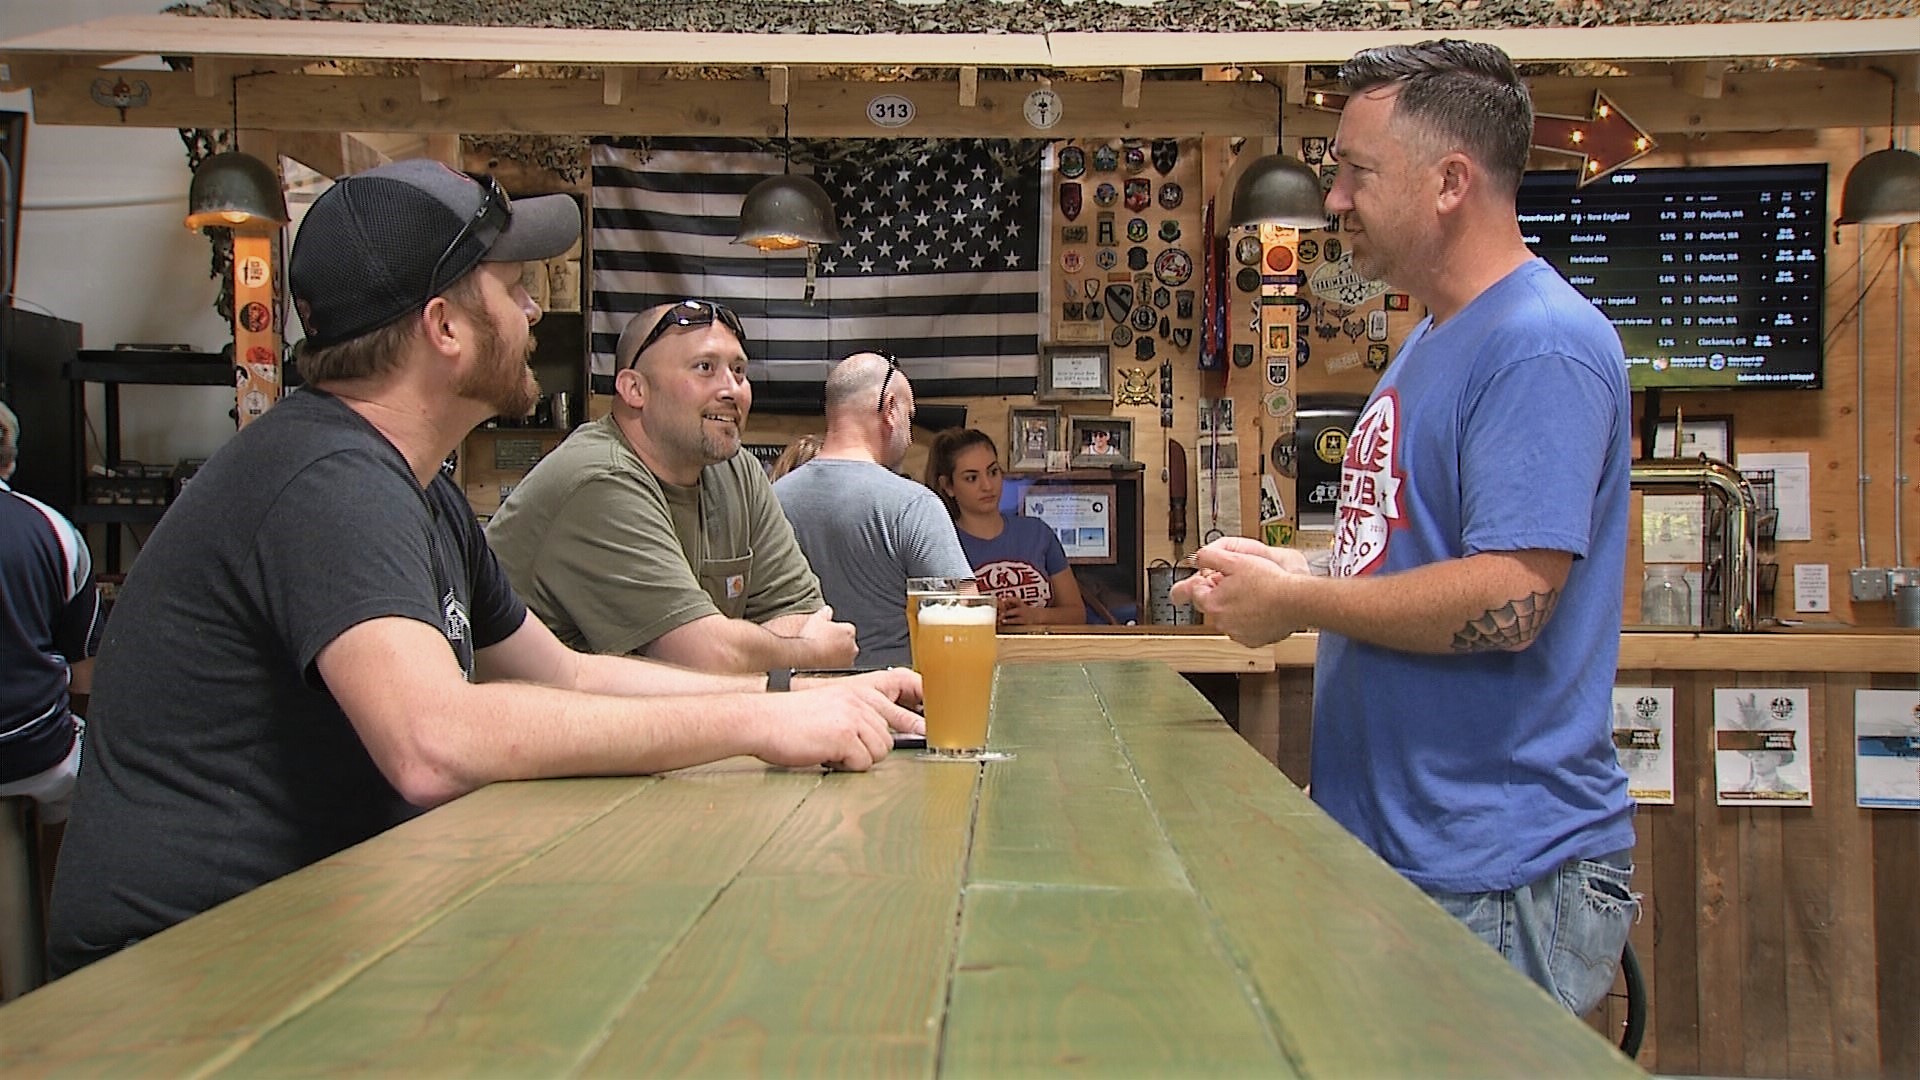 F.O.B. Brewing Co. was founded by an Army veteran and is designed to honor those who serve